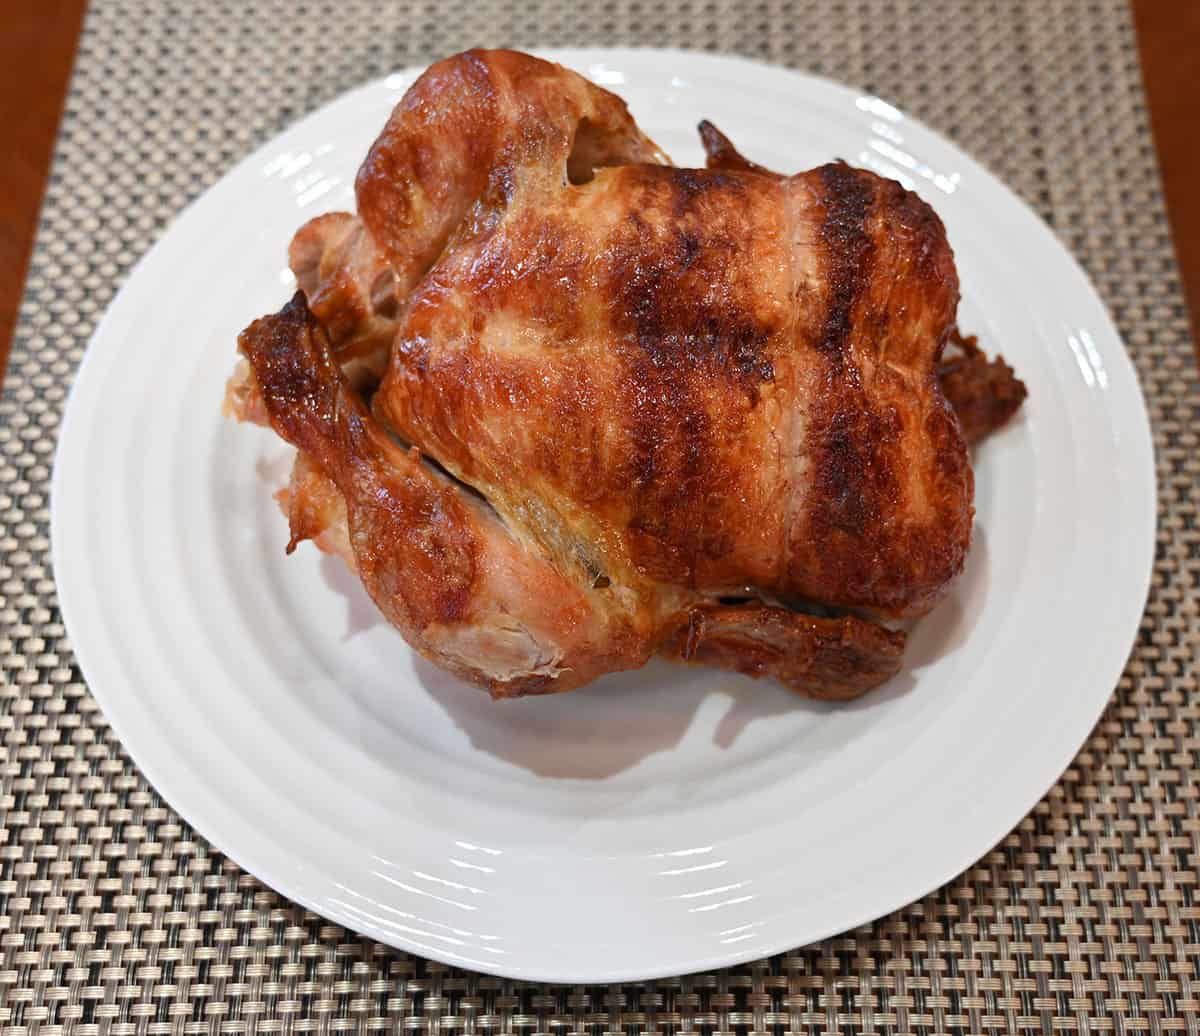 Image of the rotisserie chicken out of the tray and sitting on a white plate.